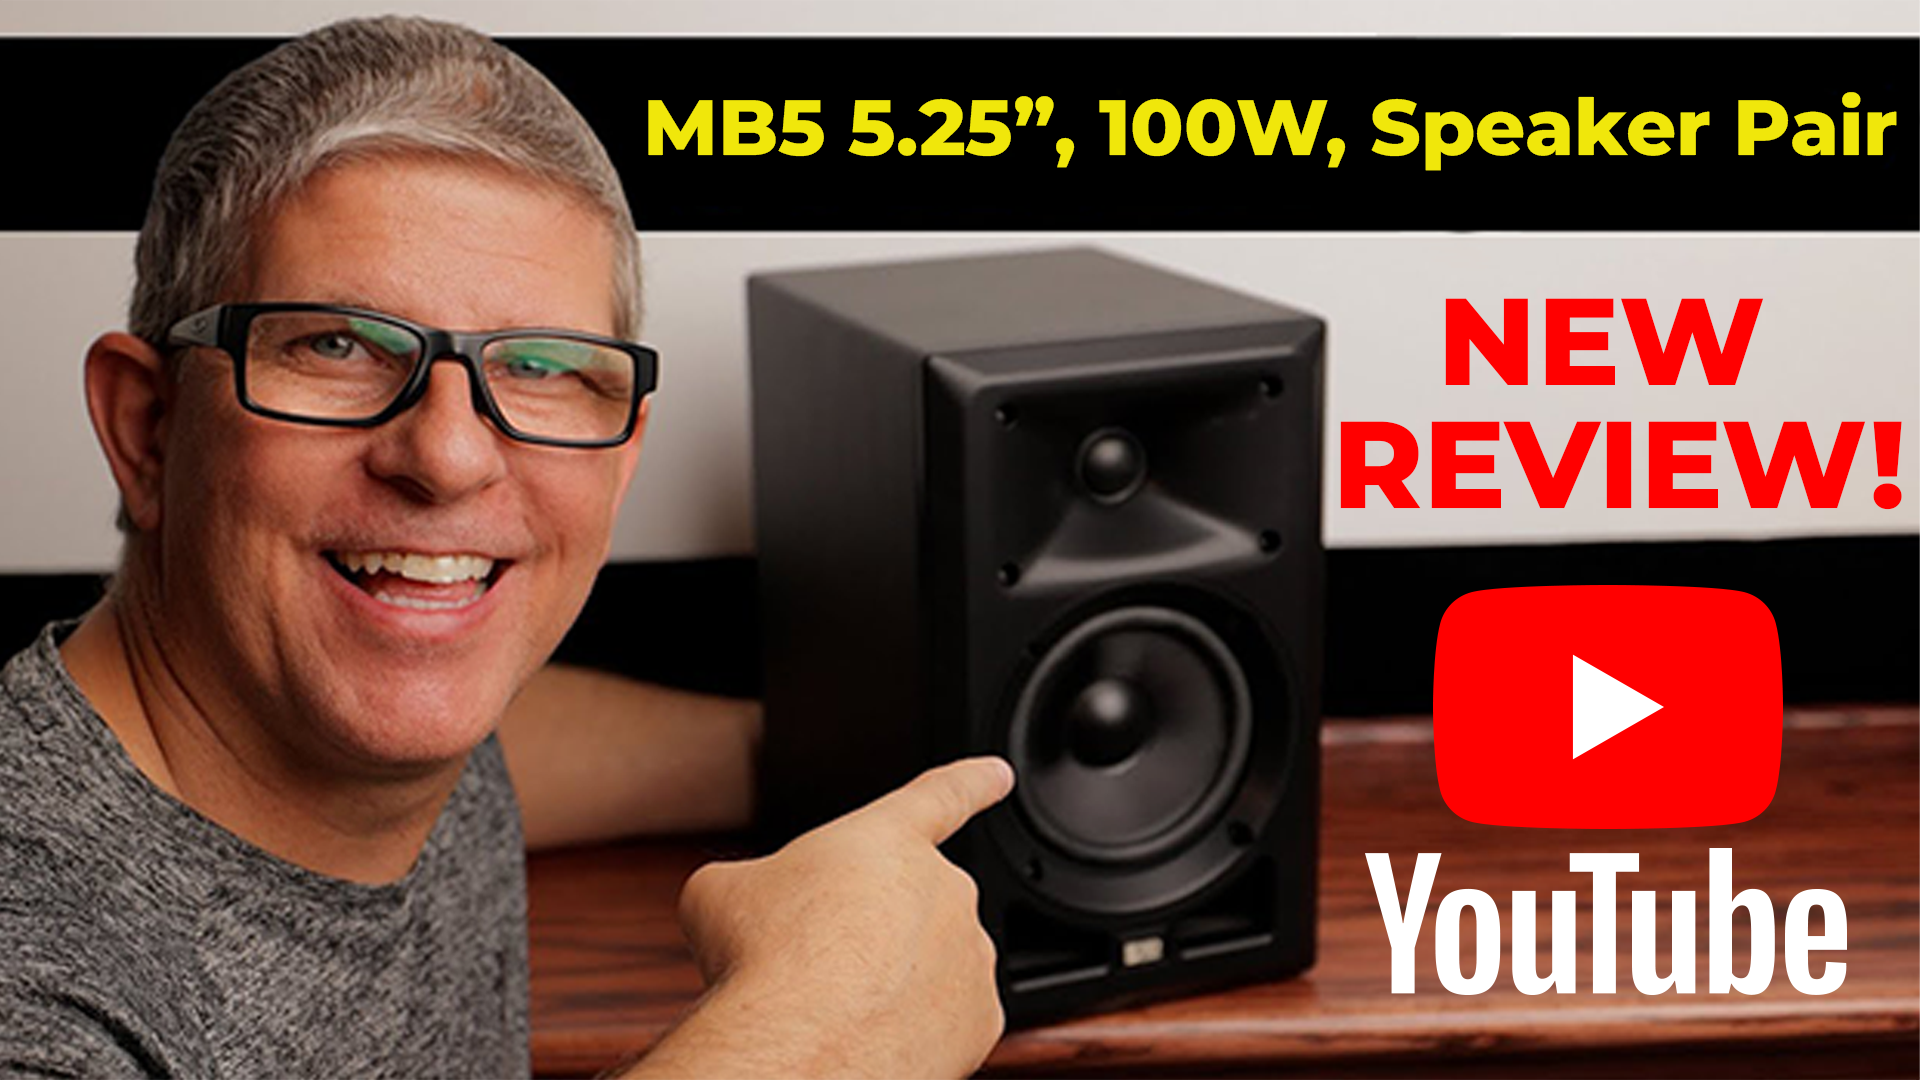 Youthman MB5 Speaker Pair YouTube Review!